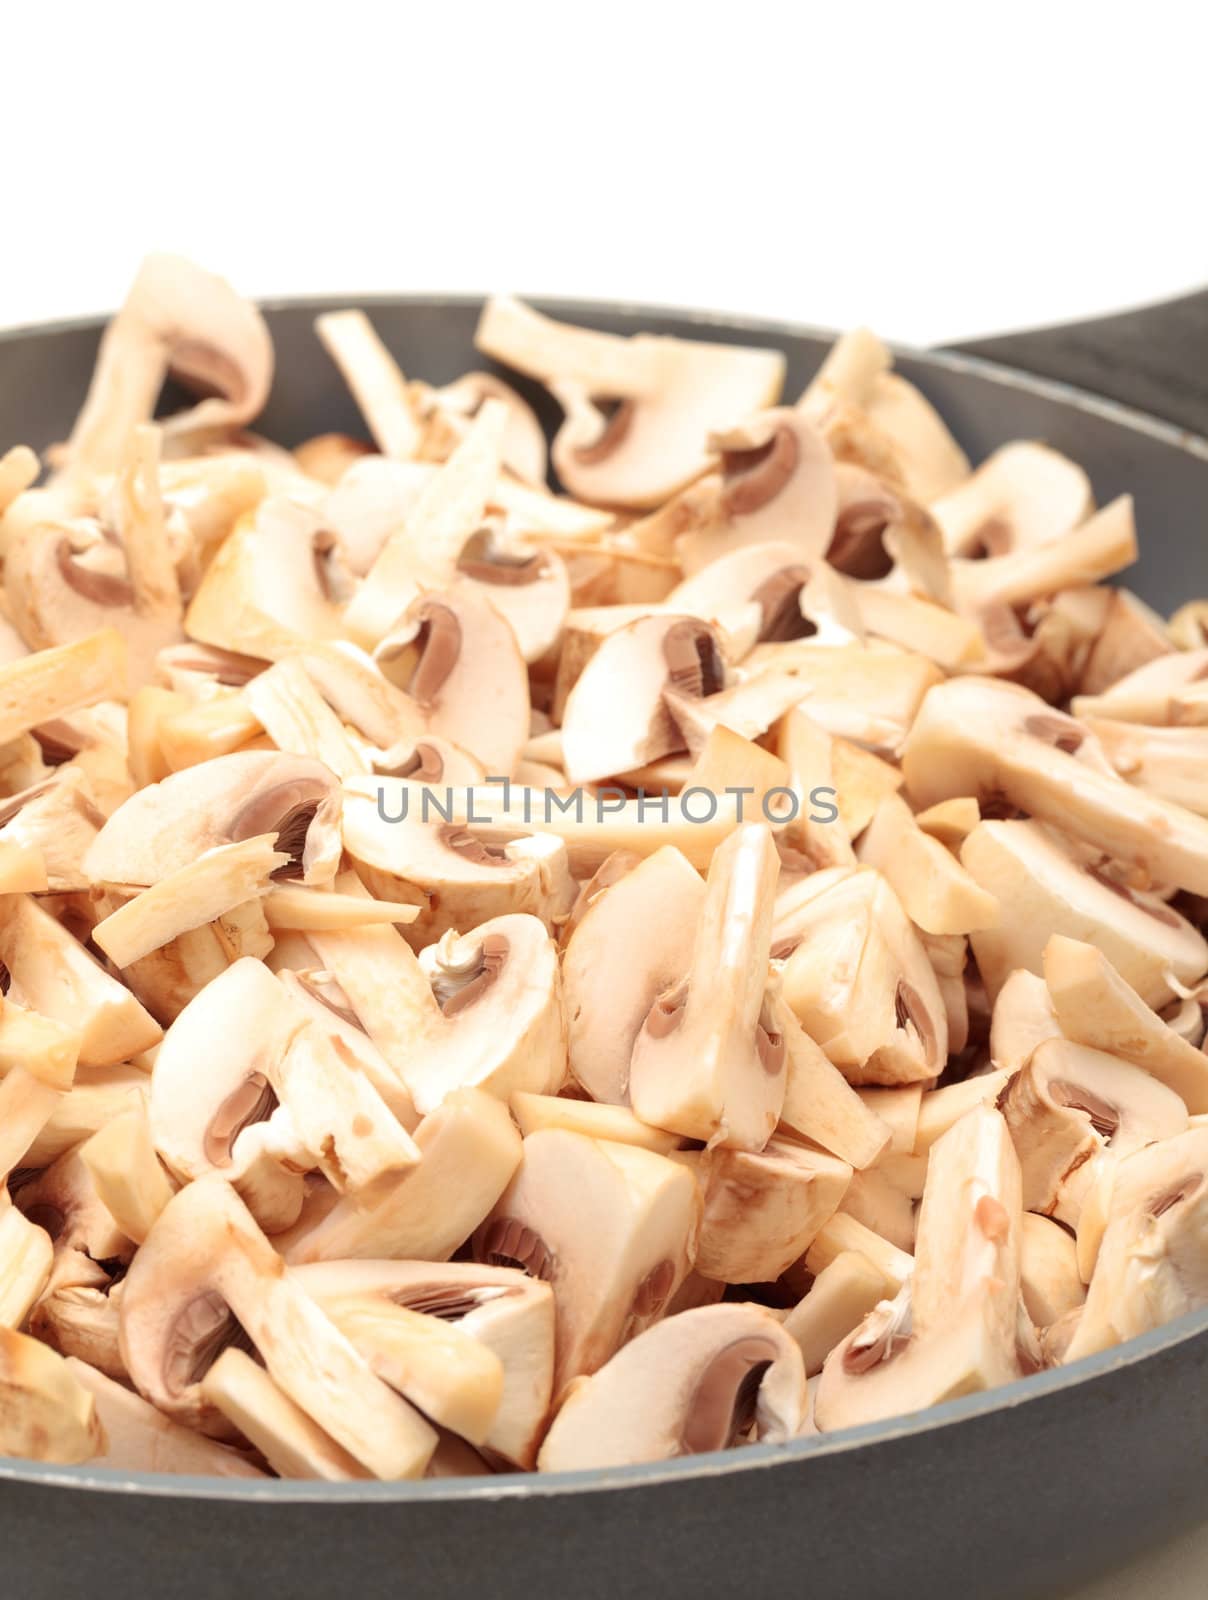 Frying Pan with the sliced Champignons by Discovod